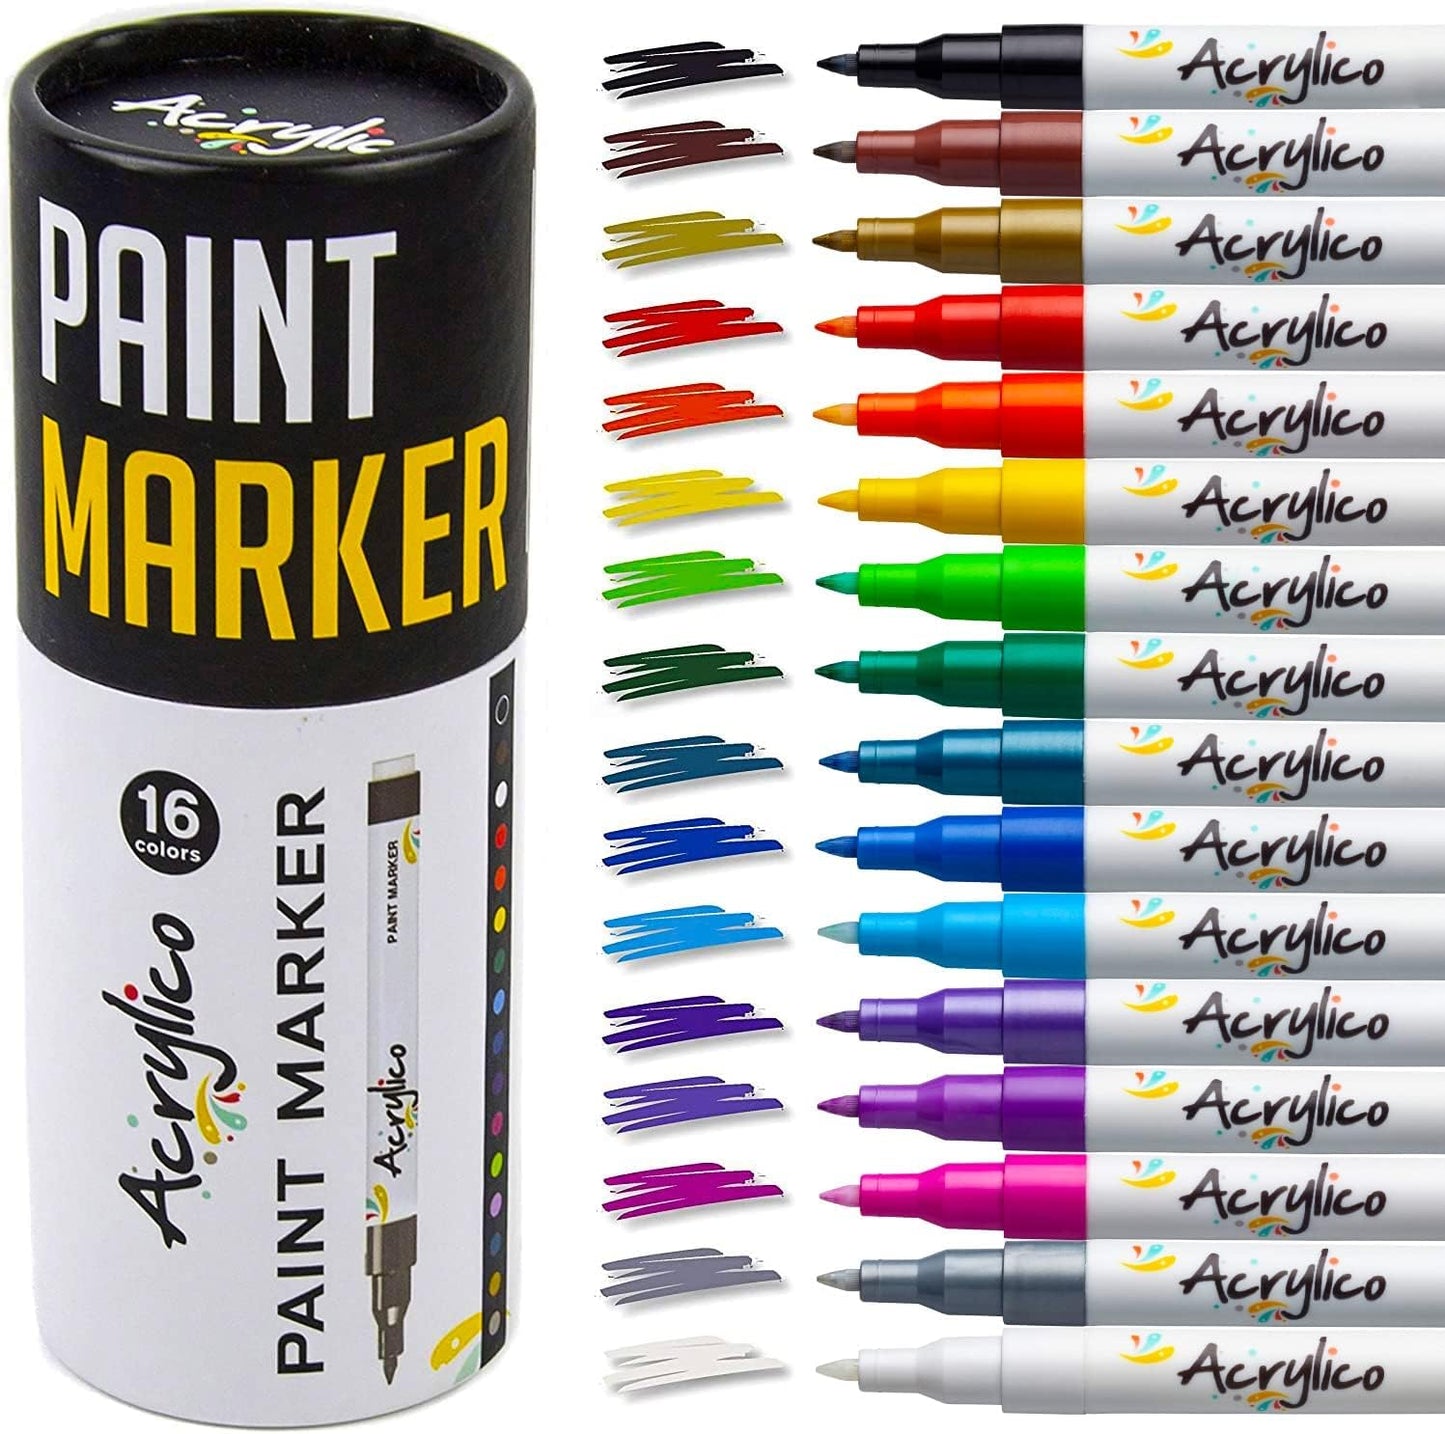 Acrylic Paint Pen Set of 32 - Extra Fine & Medium Tip Point with 8 Metallic Markers - Rock, Glass, Wood & Fabric Painting Art Supplies, Adults & Kids Arts Craft Kit for Scrapbooking & Drawing